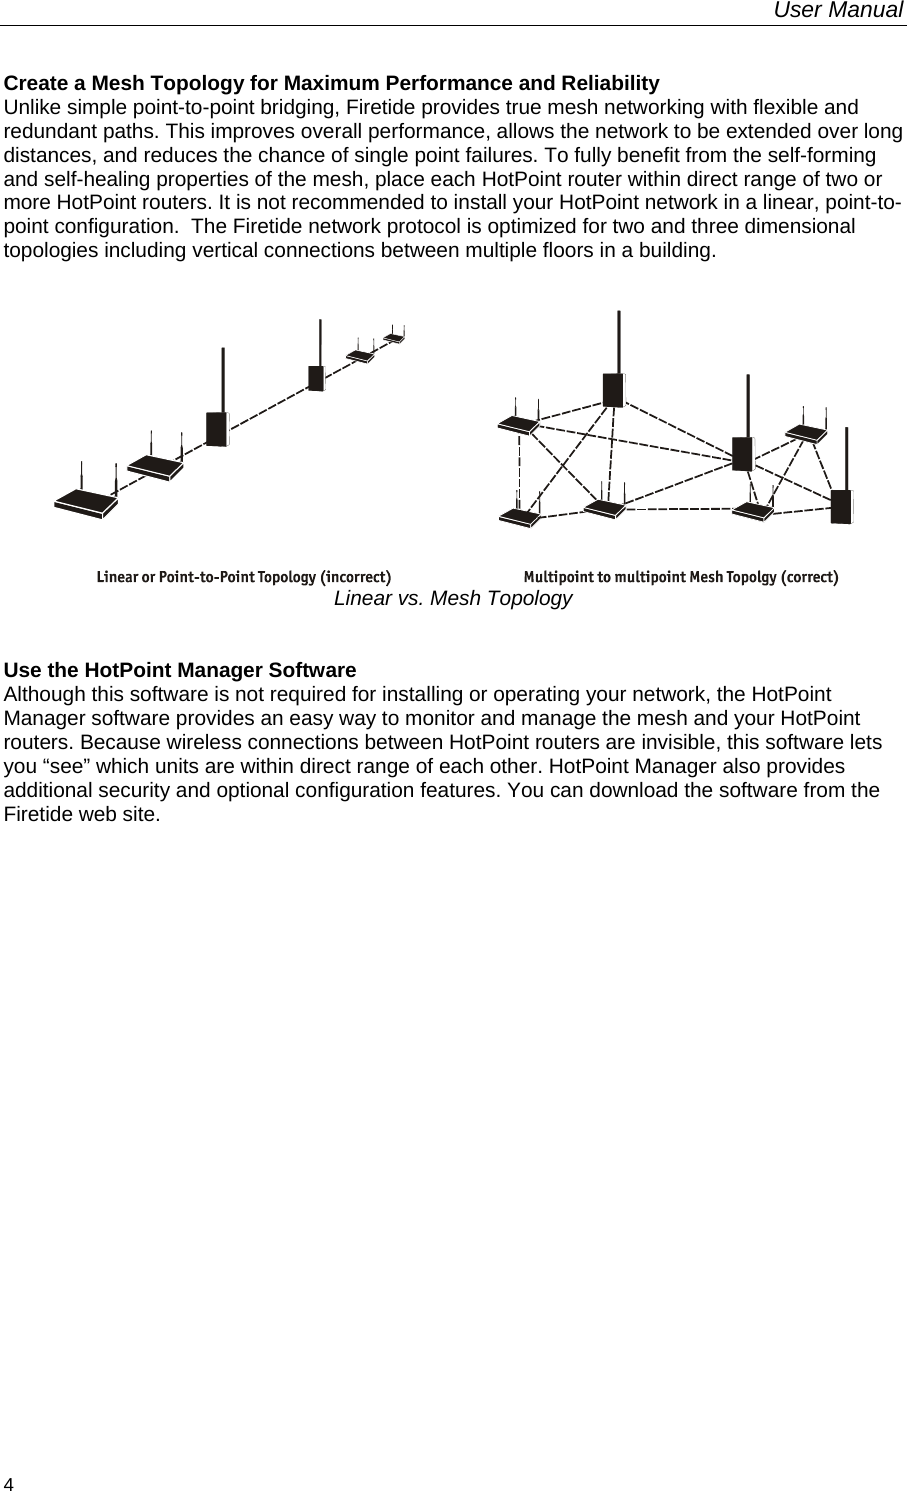 User Manual  4 Create a Mesh Topology for Maximum Performance and Reliability Unlike simple point-to-point bridging, Firetide provides true mesh networking with flexible and redundant paths. This improves overall performance, allows the network to be extended over long distances, and reduces the chance of single point failures. To fully benefit from the self-forming and self-healing properties of the mesh, place each HotPoint router within direct range of two or more HotPoint routers. It is not recommended to install your HotPoint network in a linear, point-to-point configuration.  The Firetide network protocol is optimized for two and three dimensional topologies including vertical connections between multiple floors in a building.    Linear vs. Mesh Topology   Use the HotPoint Manager Software Although this software is not required for installing or operating your network, the HotPoint Manager software provides an easy way to monitor and manage the mesh and your HotPoint routers. Because wireless connections between HotPoint routers are invisible, this software lets you “see” which units are within direct range of each other. HotPoint Manager also provides additional security and optional configuration features. You can download the software from the Firetide web site. 